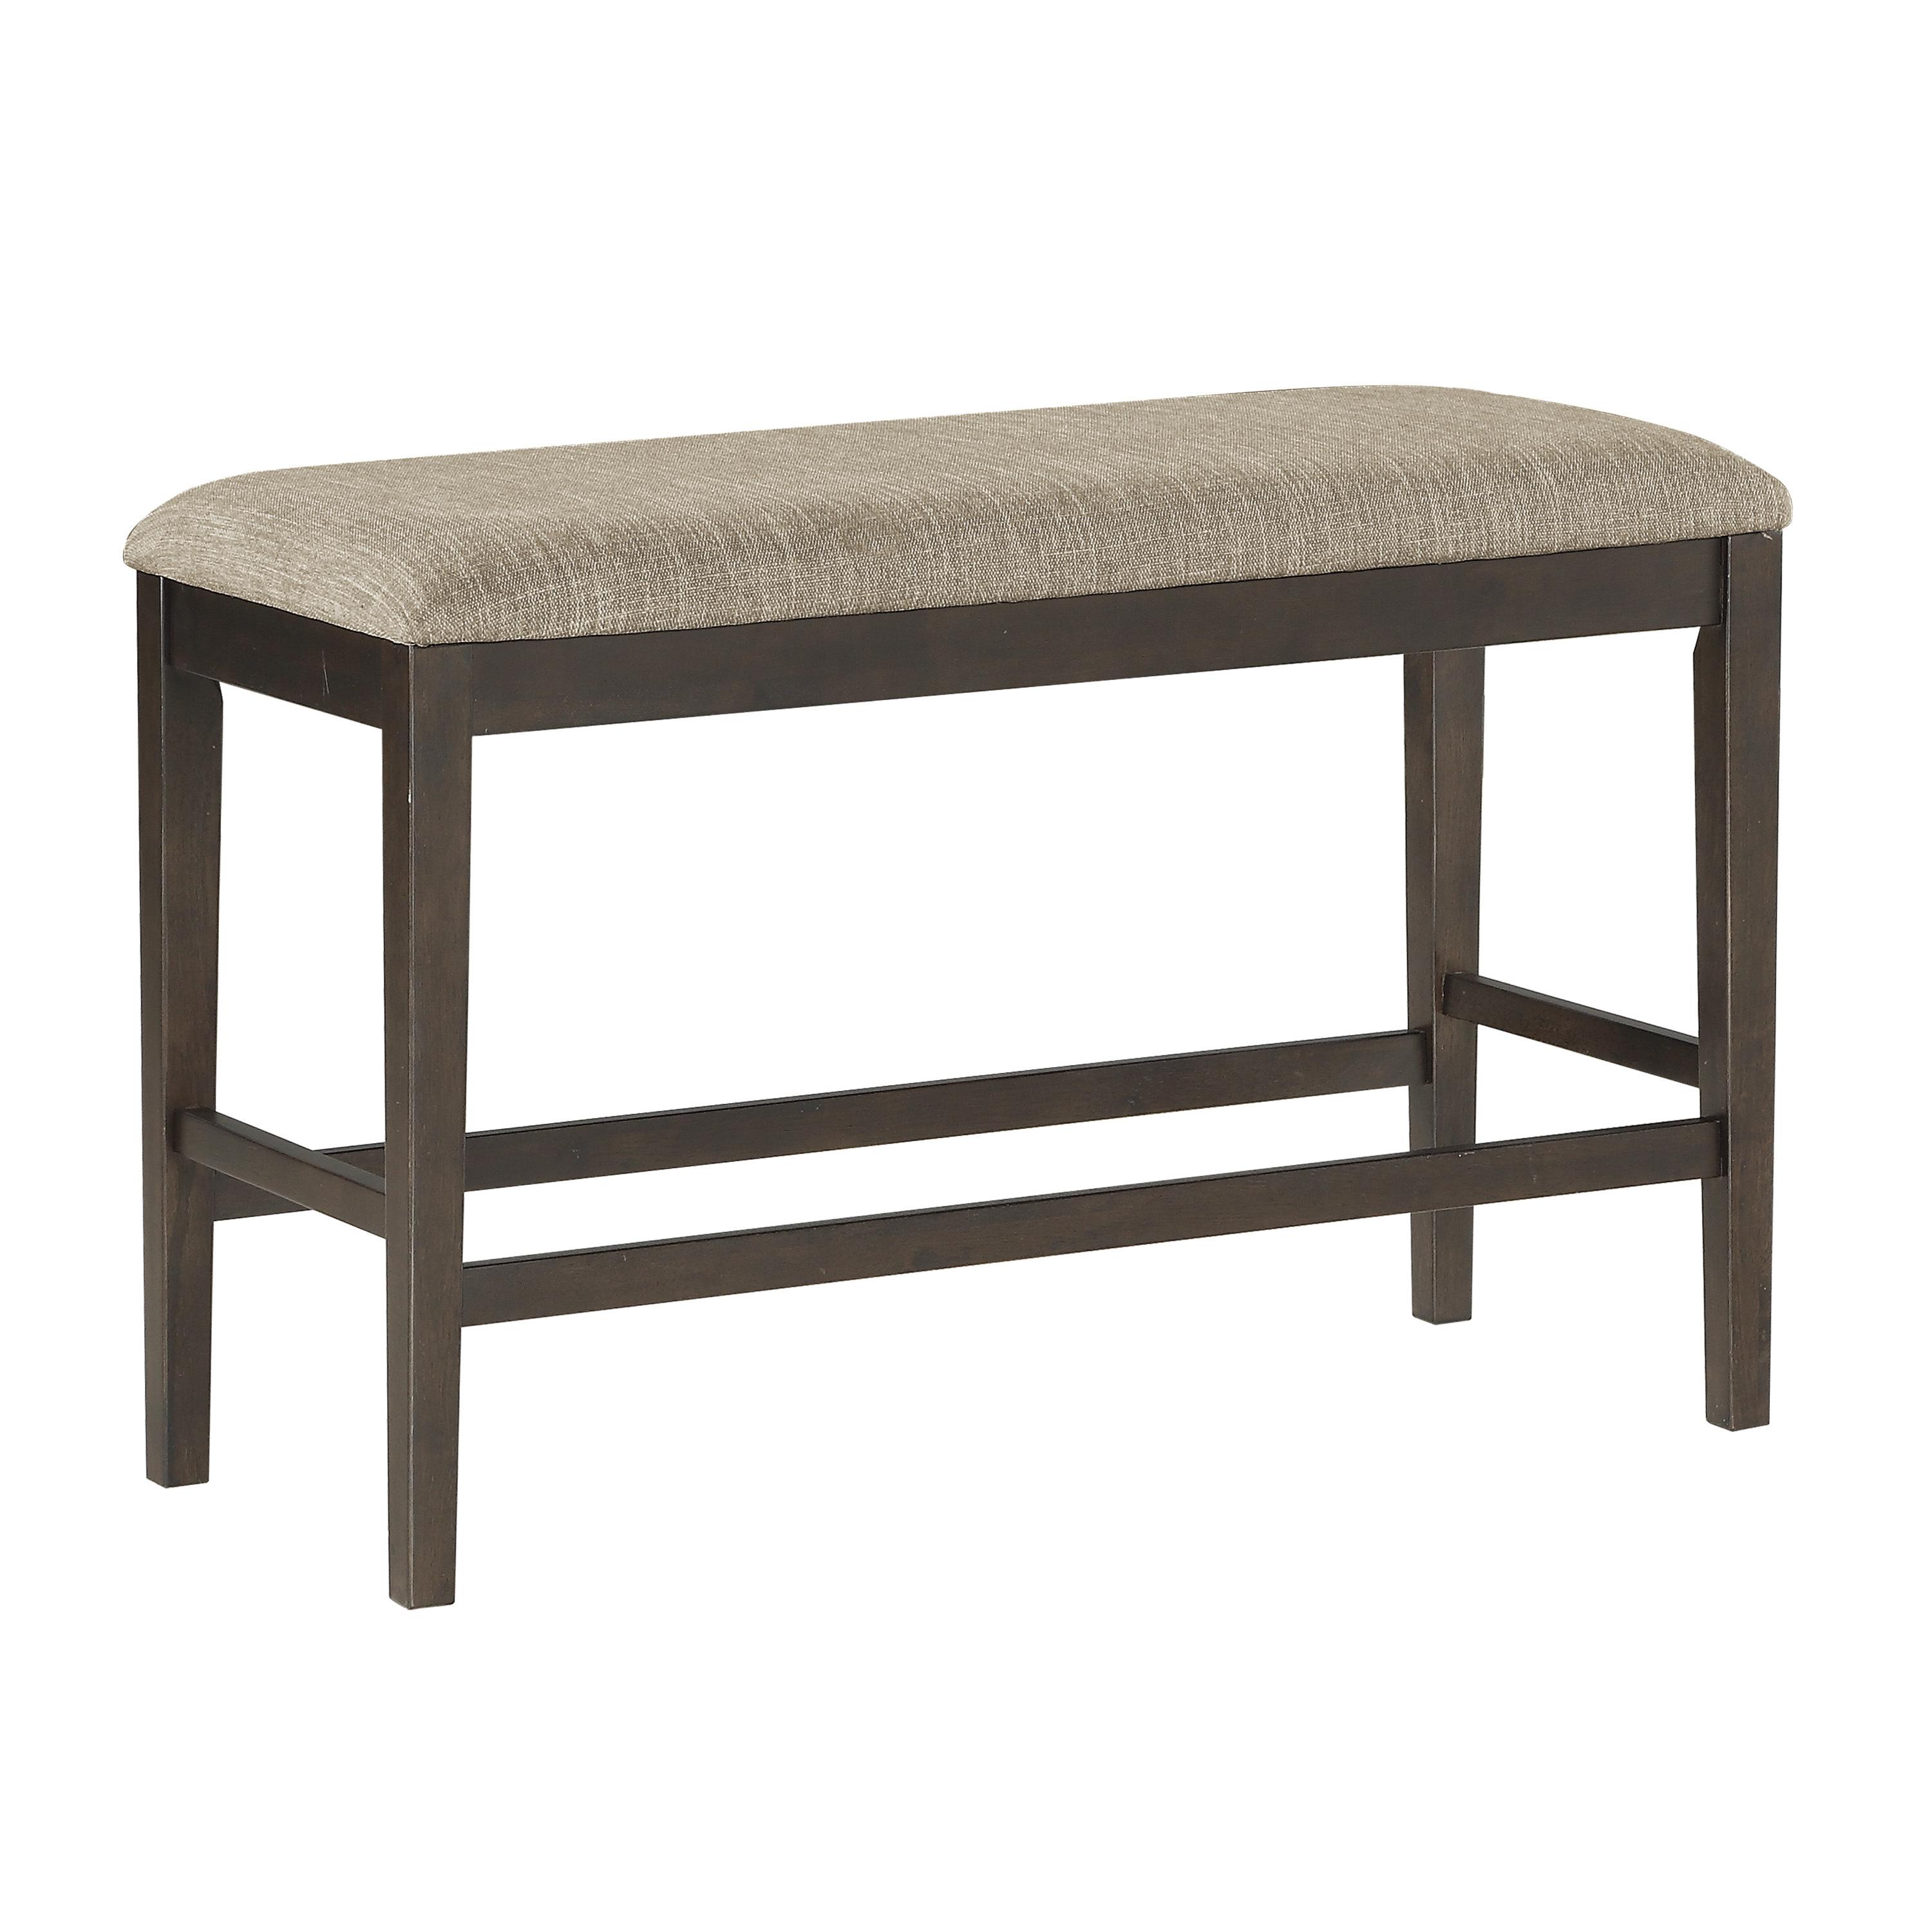 Rustic Bench 5716-24BH Balin 5716-24BH in Dark Brown Polyester